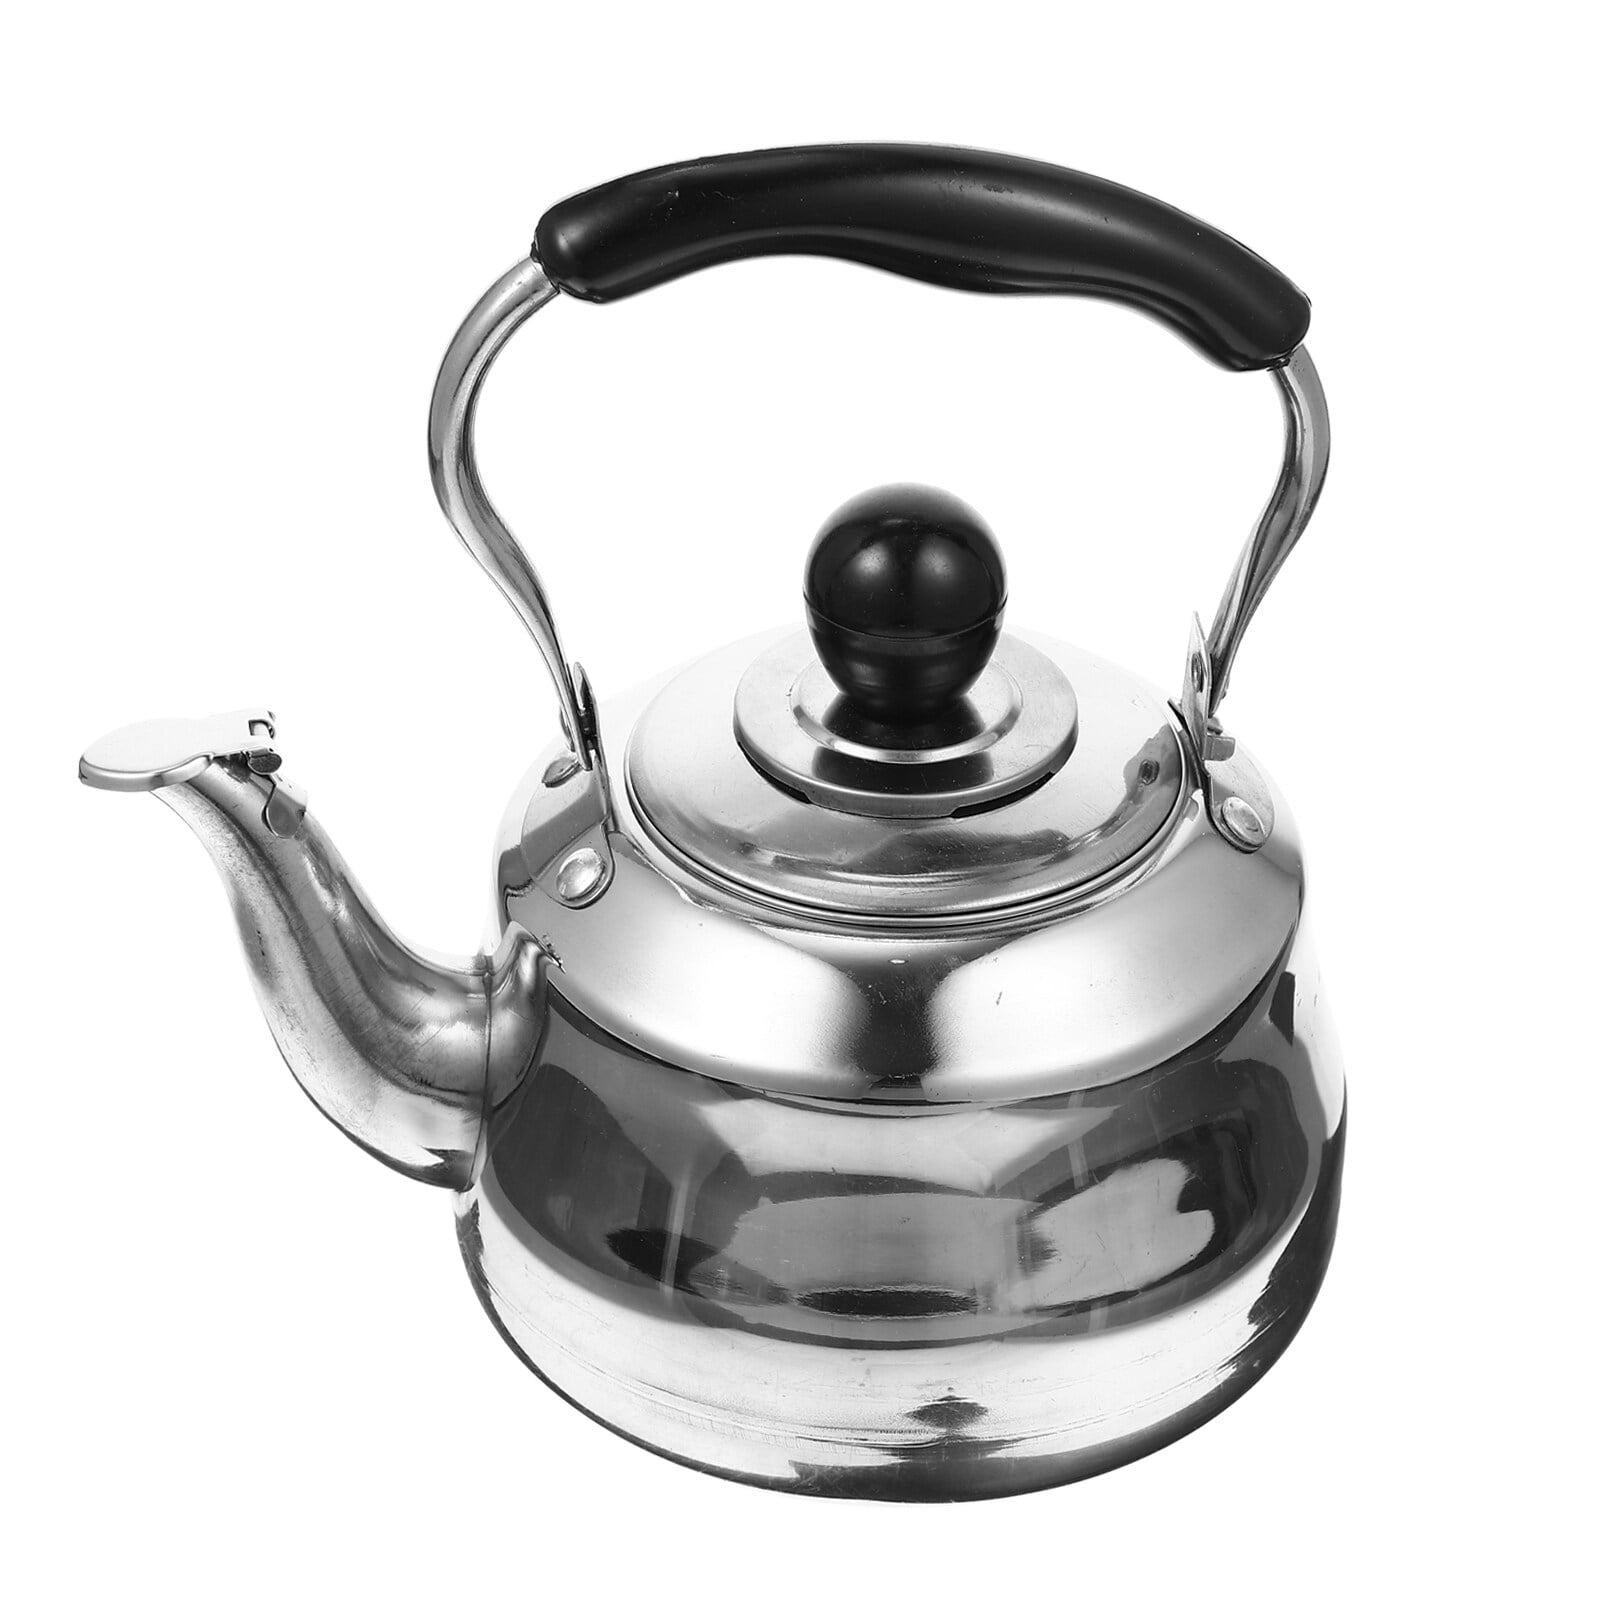 S-P Whistling Tea Kettle Stainless Steel Teapot Teakettle for Stovetop Induction Stove Top Fast Boiling Heat Water Tea Pot 22 Quart(gray)